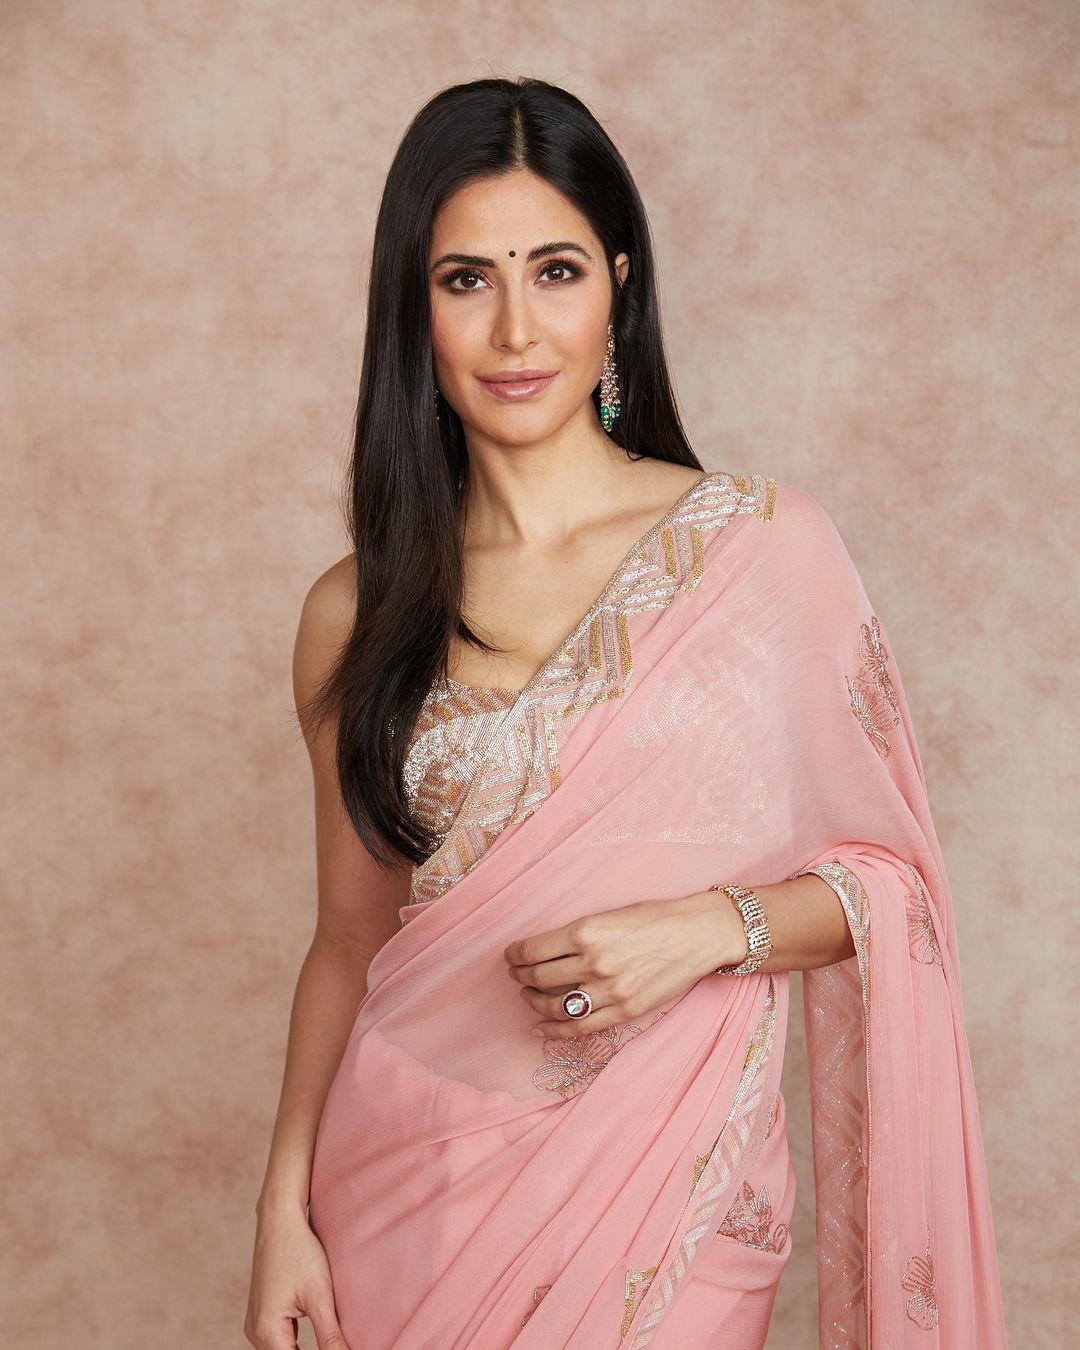 This plain blush pink saree with a heavy blouse is a perfect way to get the minimalist yet stylish festive look.  (Image: Instagram/katrinakaif)